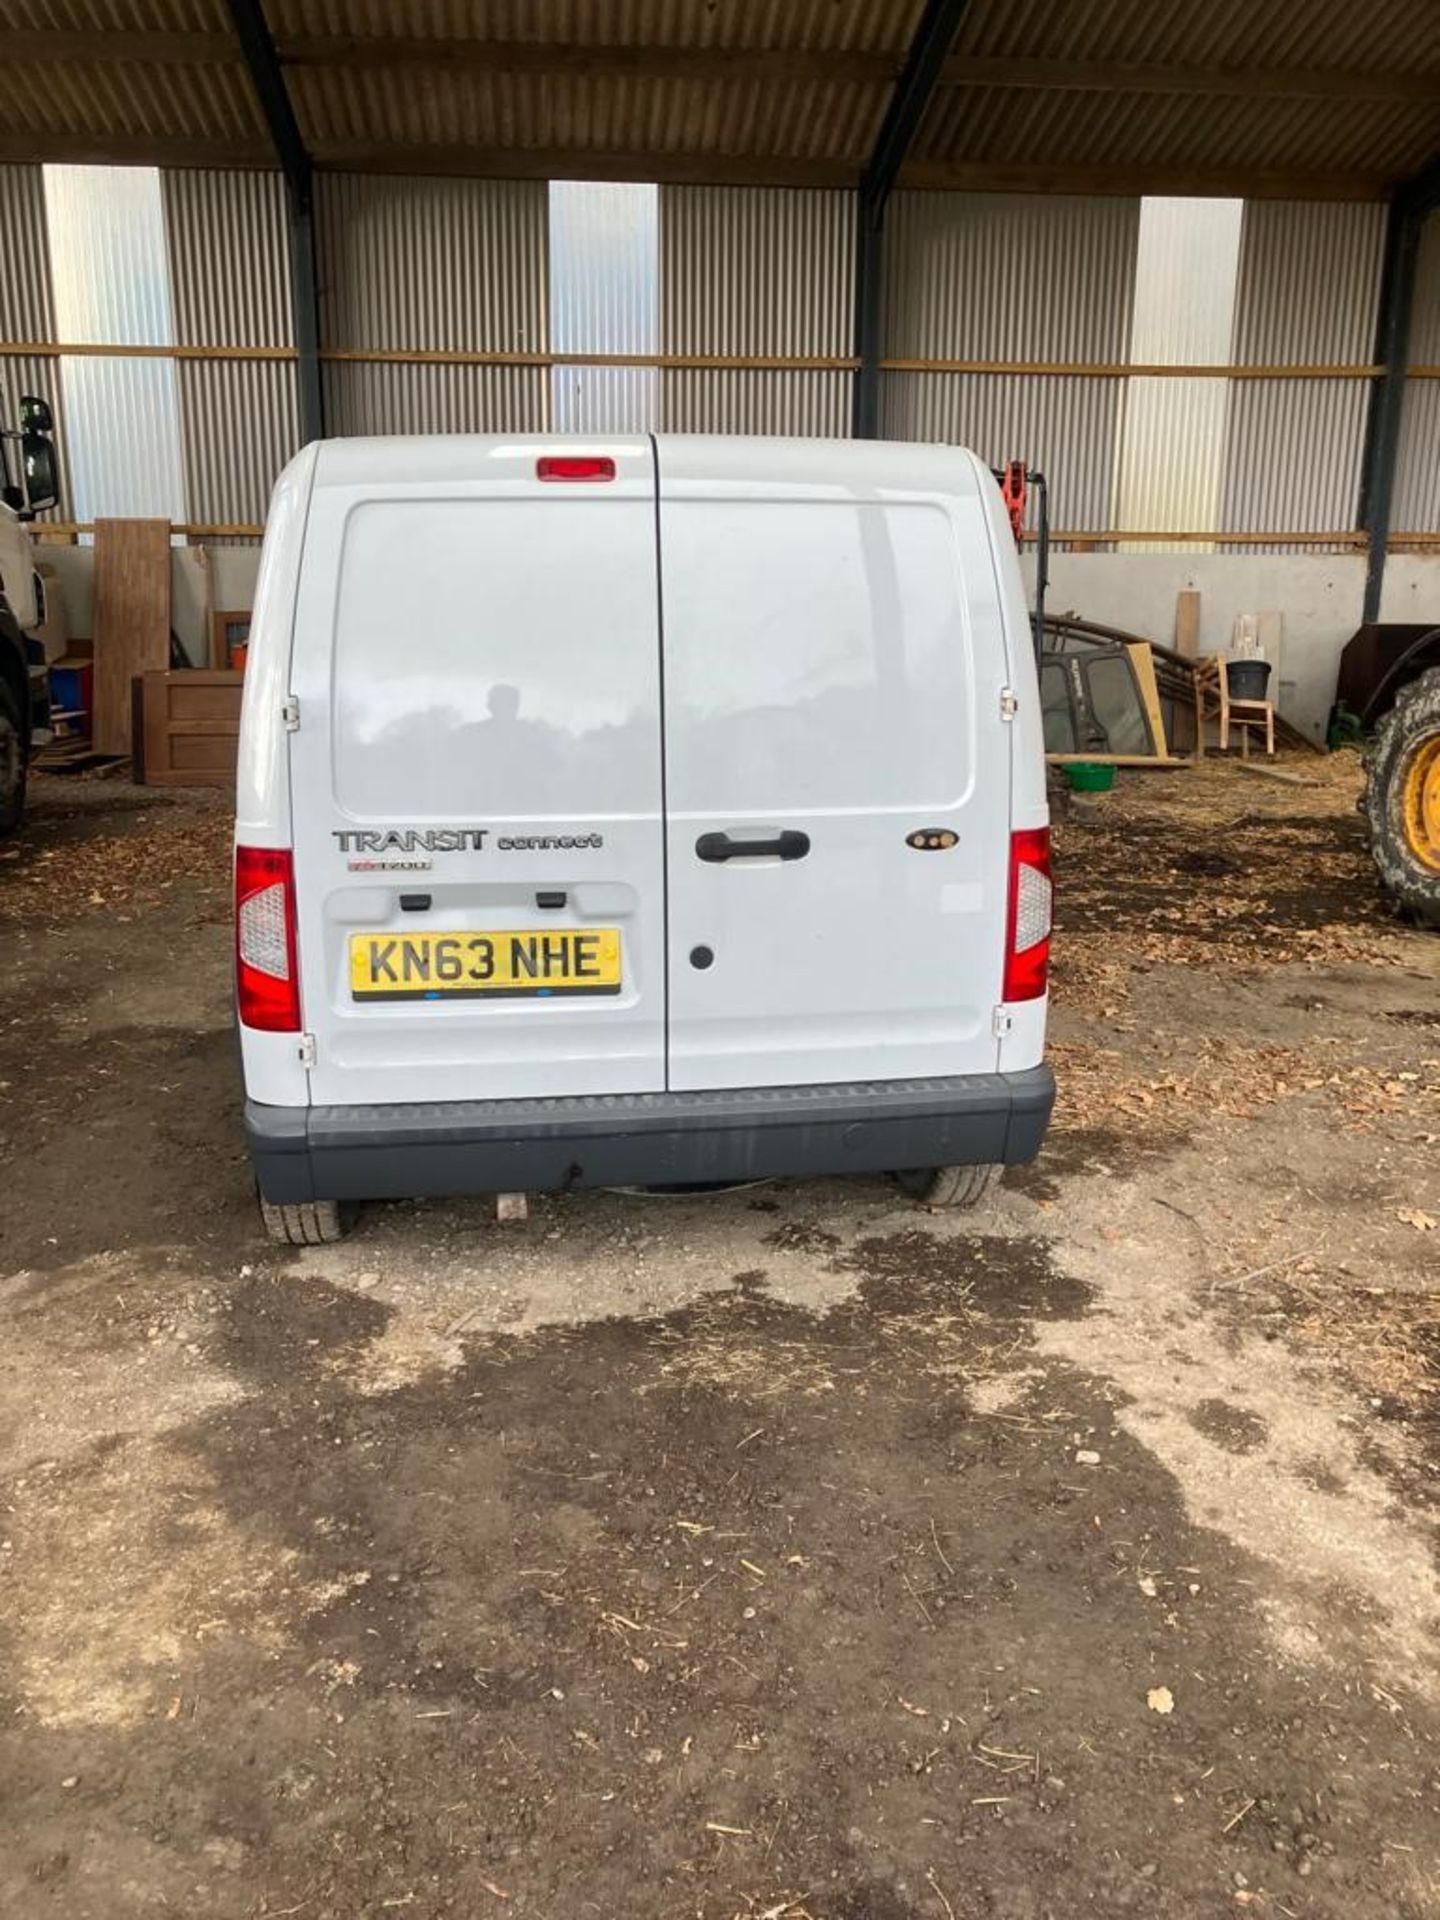 FORD TRANSIT CONNECT VAN. 63 PLATE - Image 8 of 10